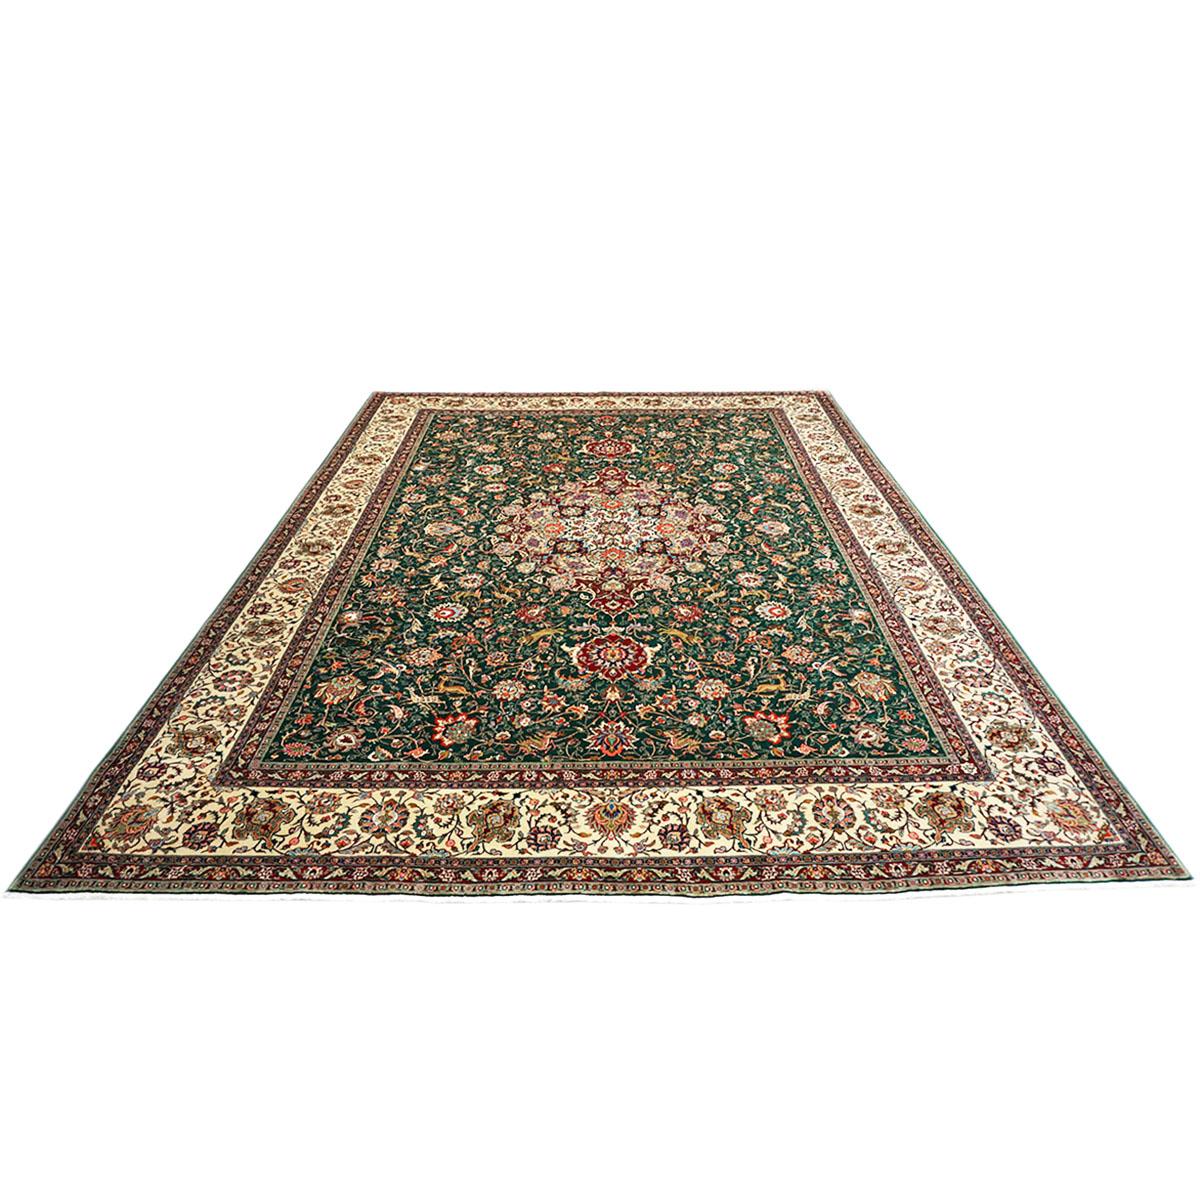 Antique Persian Tabriz 9x12 Green, Red, & Ivory Handmade Area Rug In Good Condition For Sale In Houston, TX